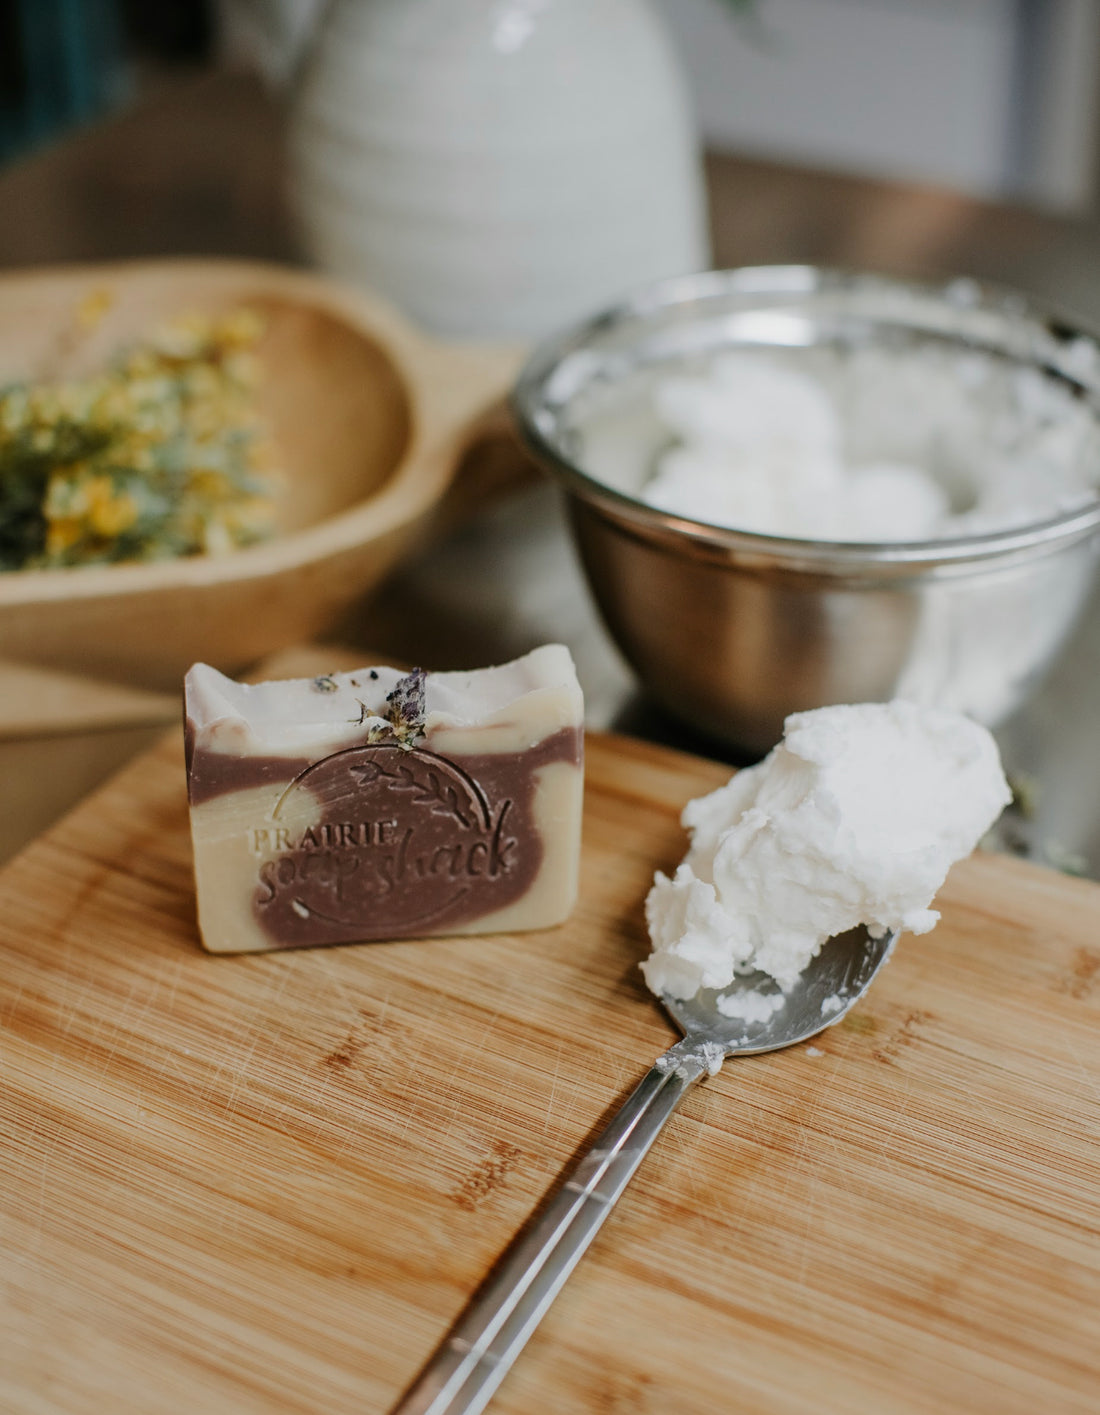 Tallow Soap Benefits Are Something To Talk About!